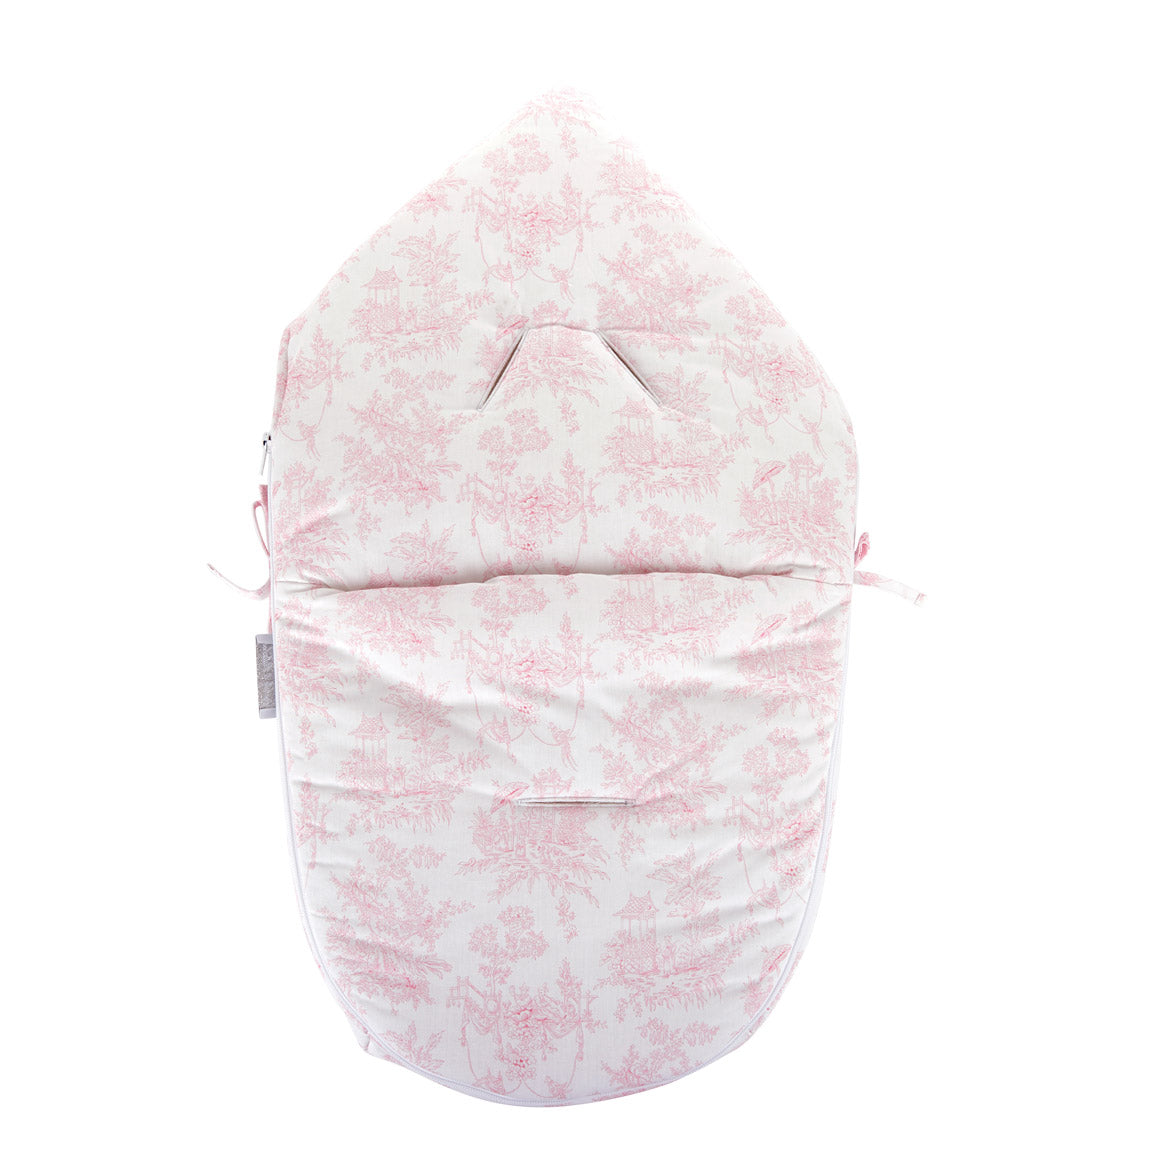 Theophile & Patachou Hooded Sleeping Bag for Car Seat “Pebble Pro” - Sweet Pink